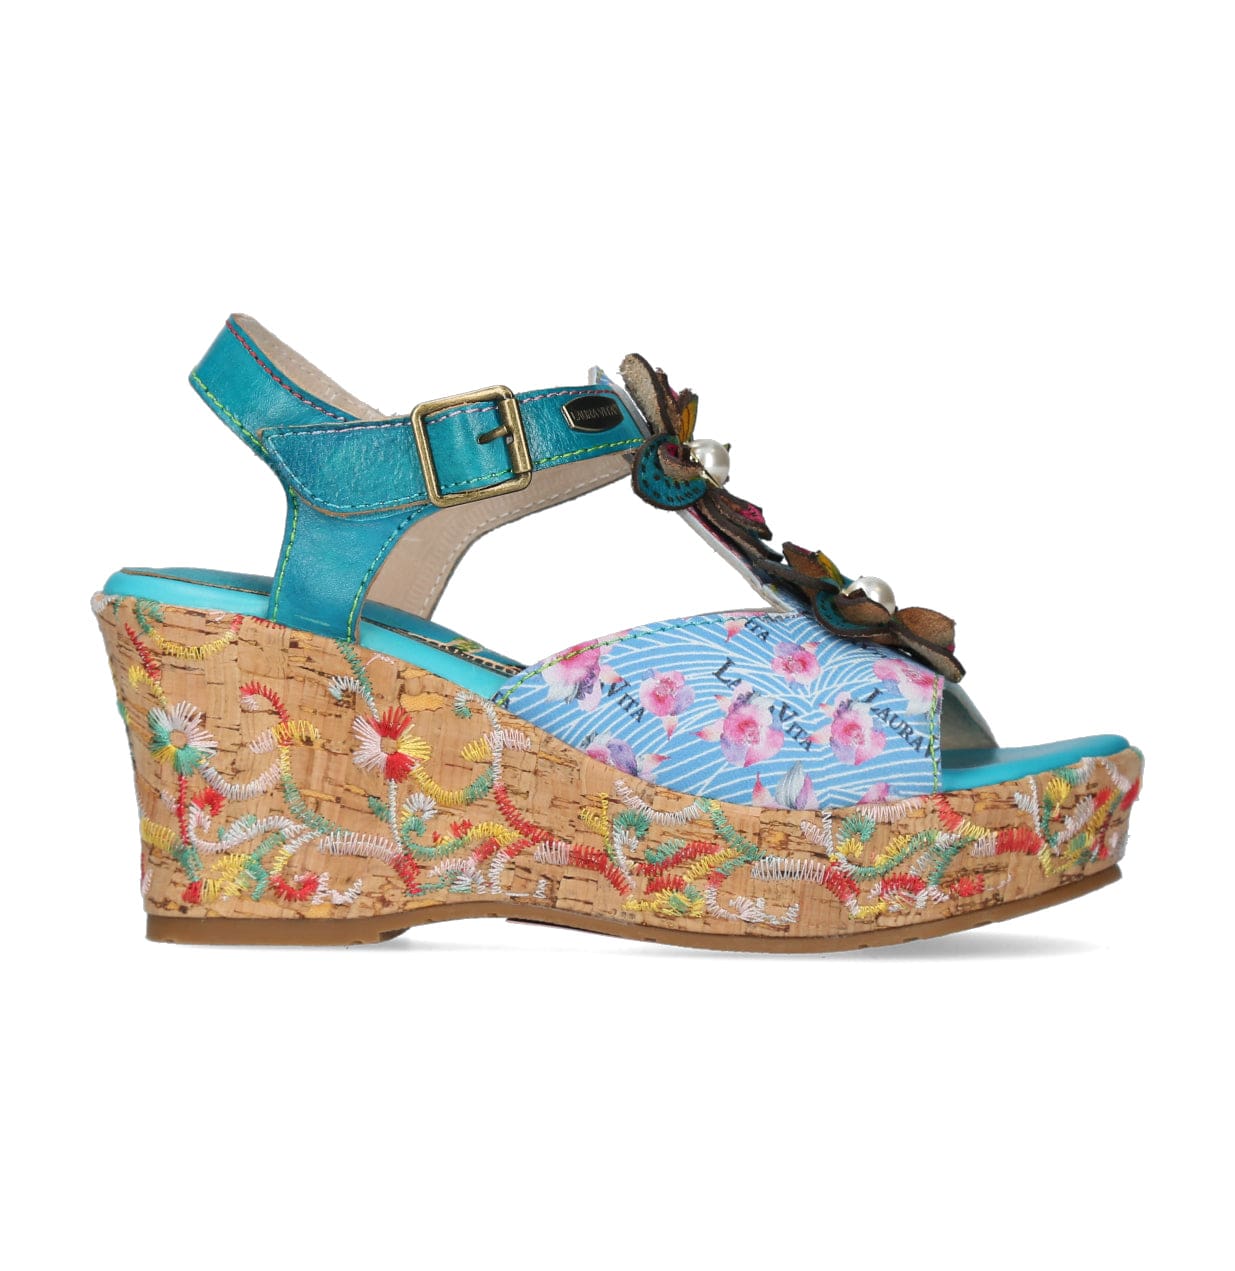 Chaussures LORIEO 03 - 35 / Turquoise - Sandale